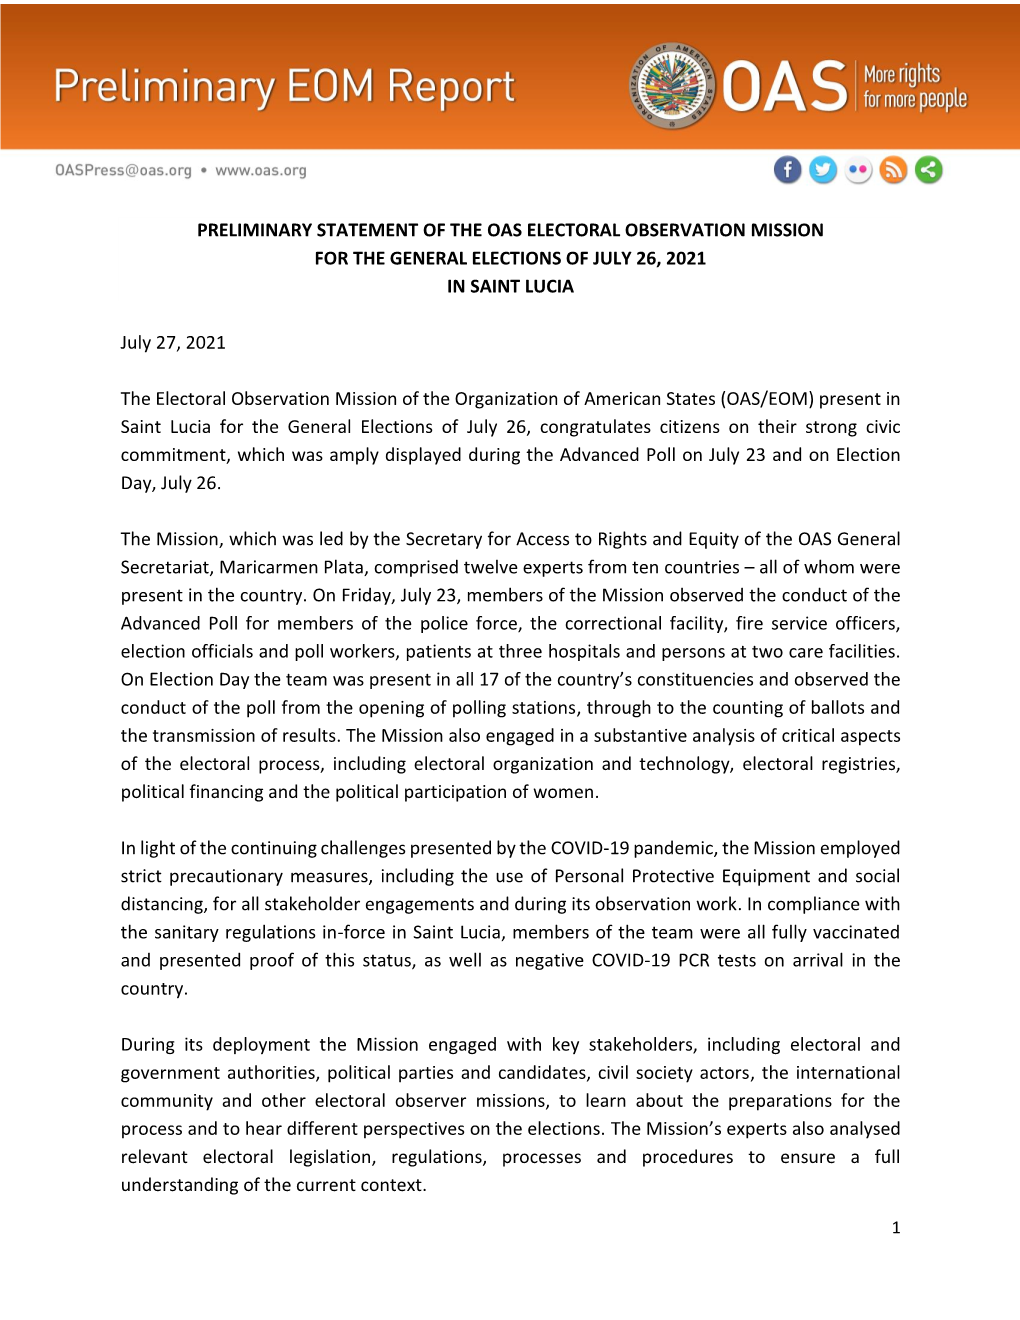 PRELIMINARY STATEMENT of the OAS ELECTORAL OBSERVATION MISSION for the GENERAL ELECTIONS of JULY 26, 2021 in SAINT LUCIA July 27